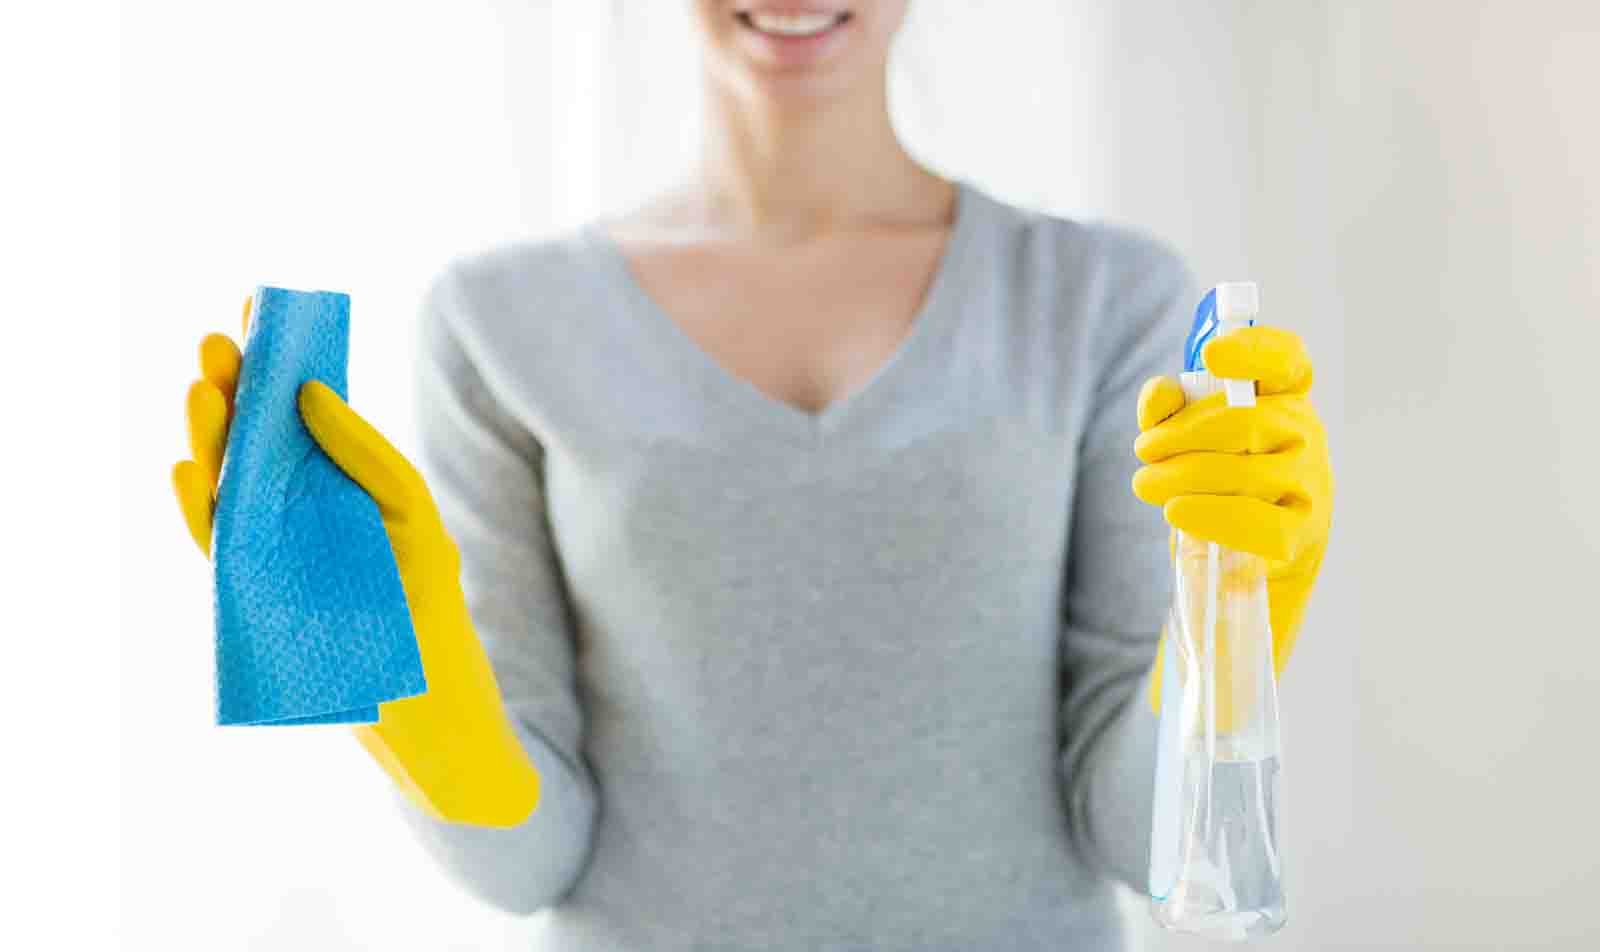 DIY Homemade Cleaning Products + Recipes for Natural Cleaners